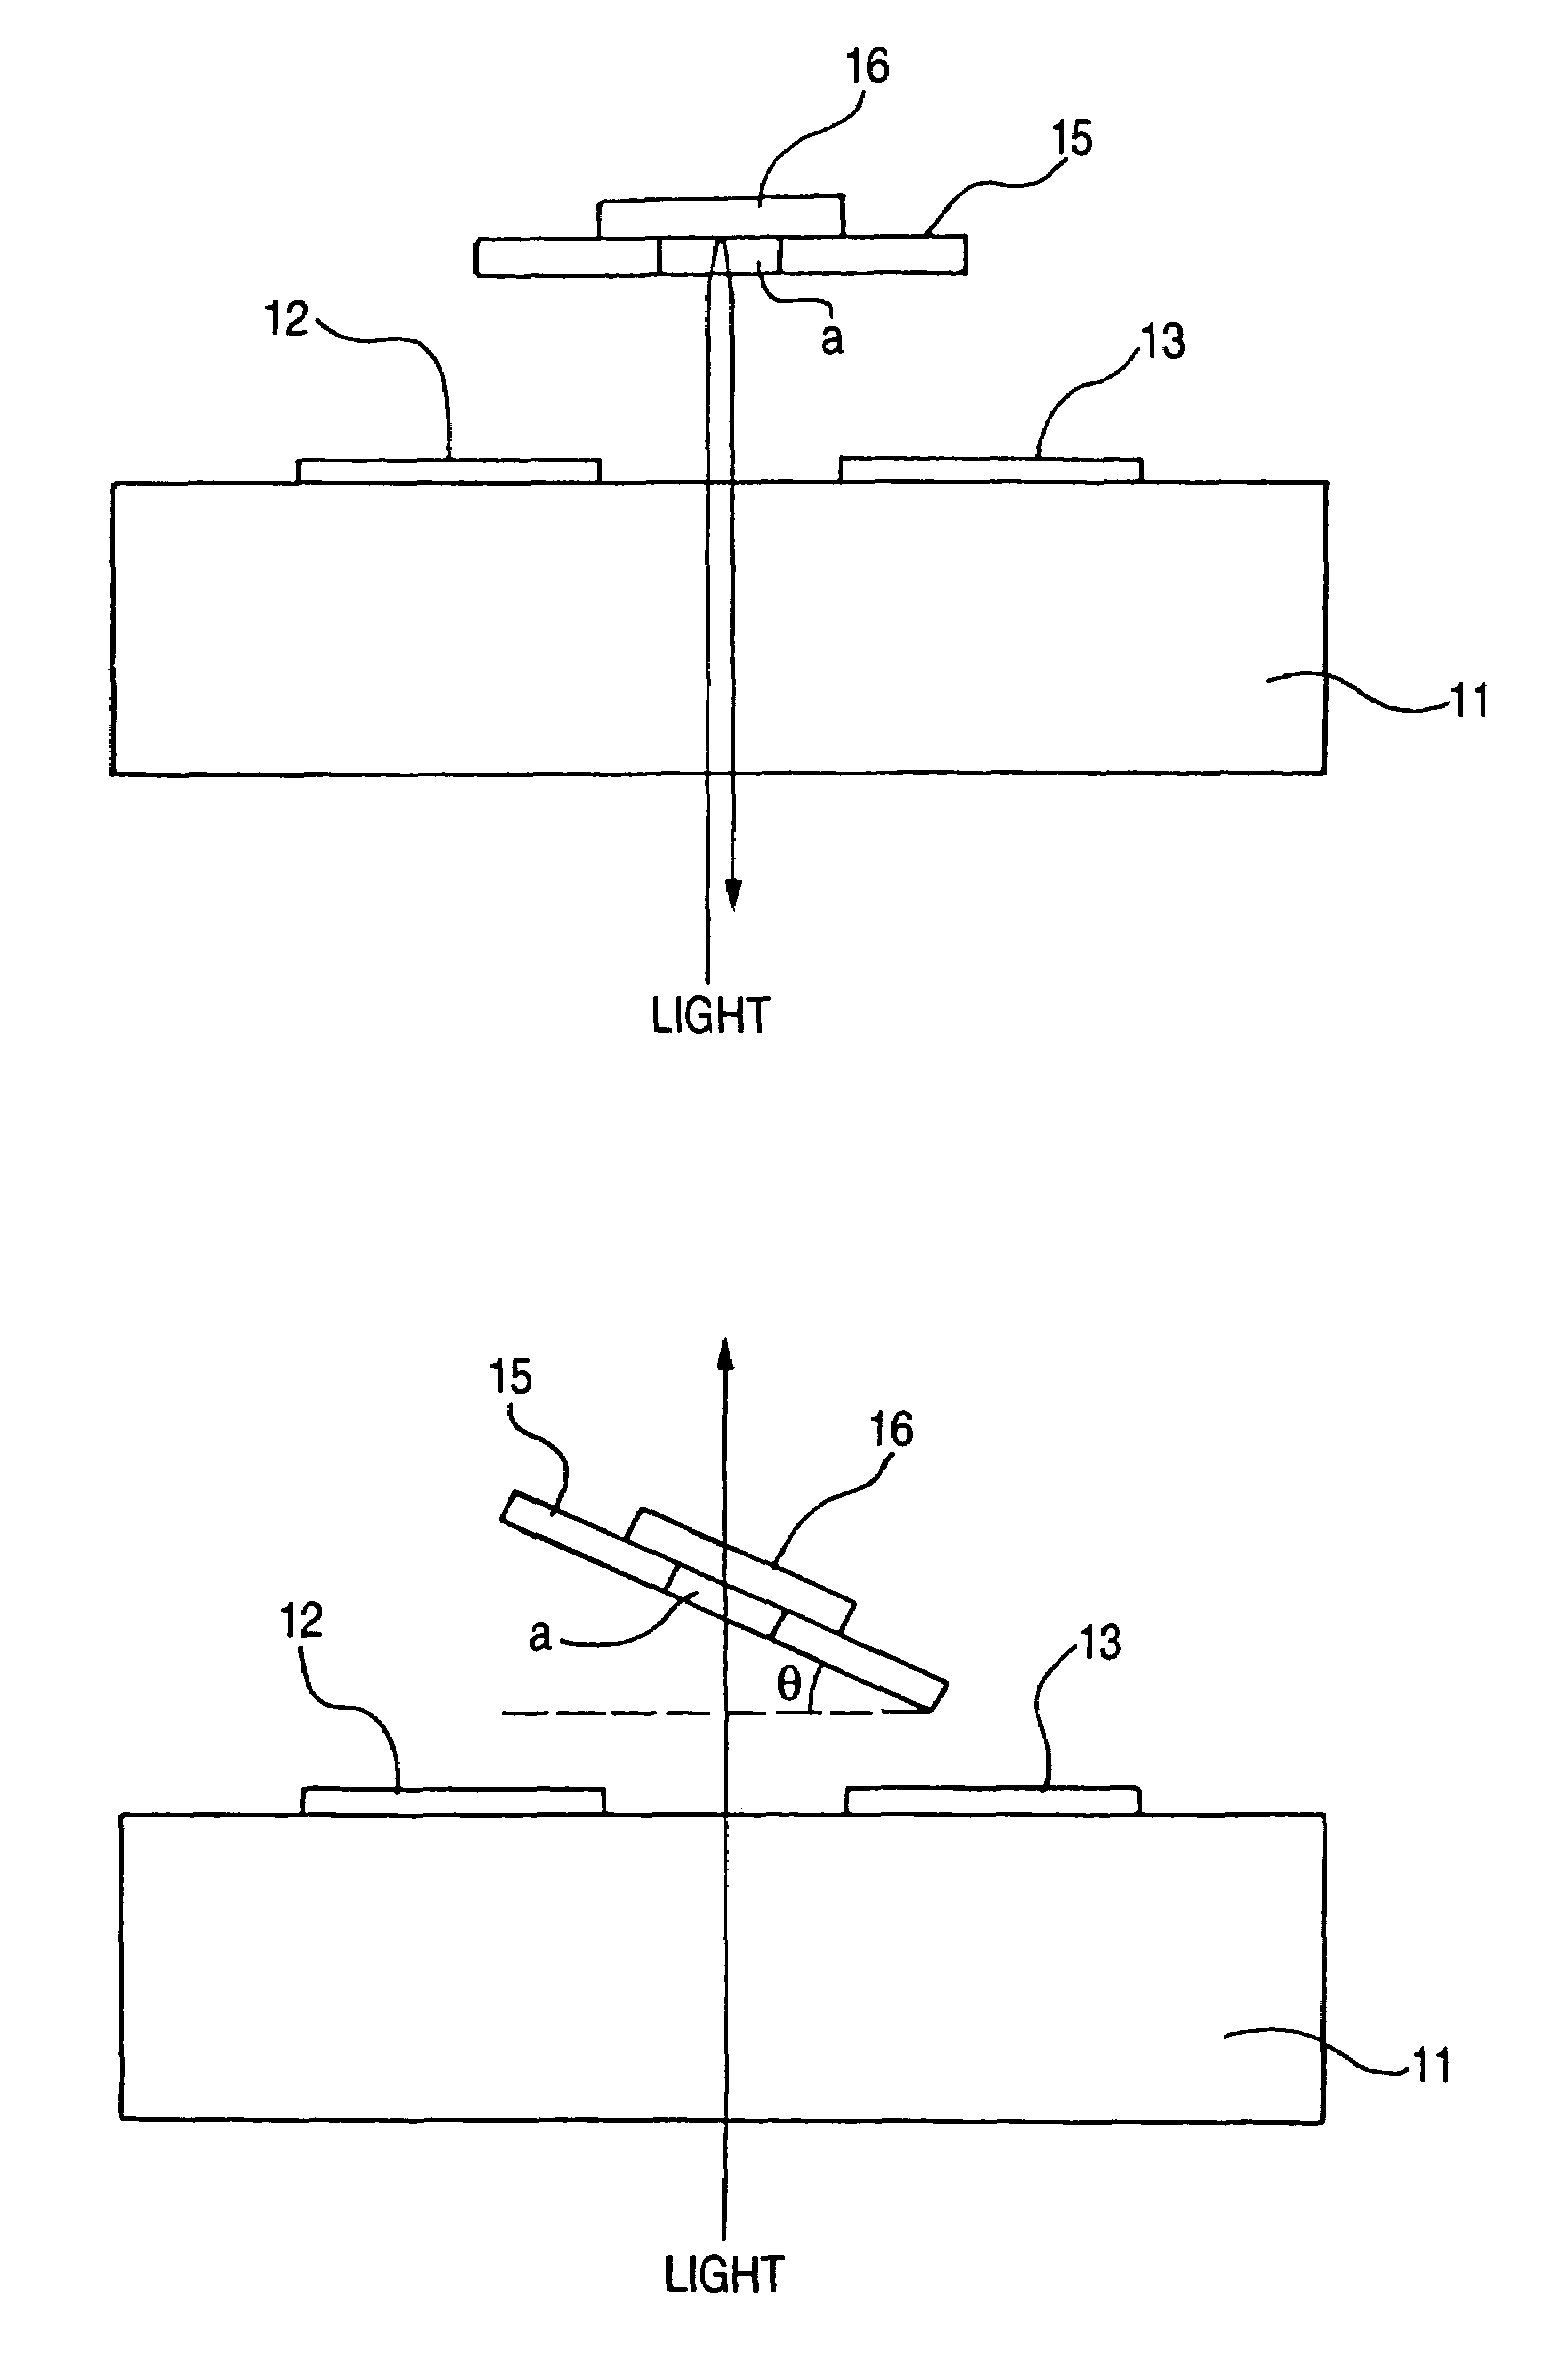 Spatial light modulator, spatial light modulator array, and image formation apparatus